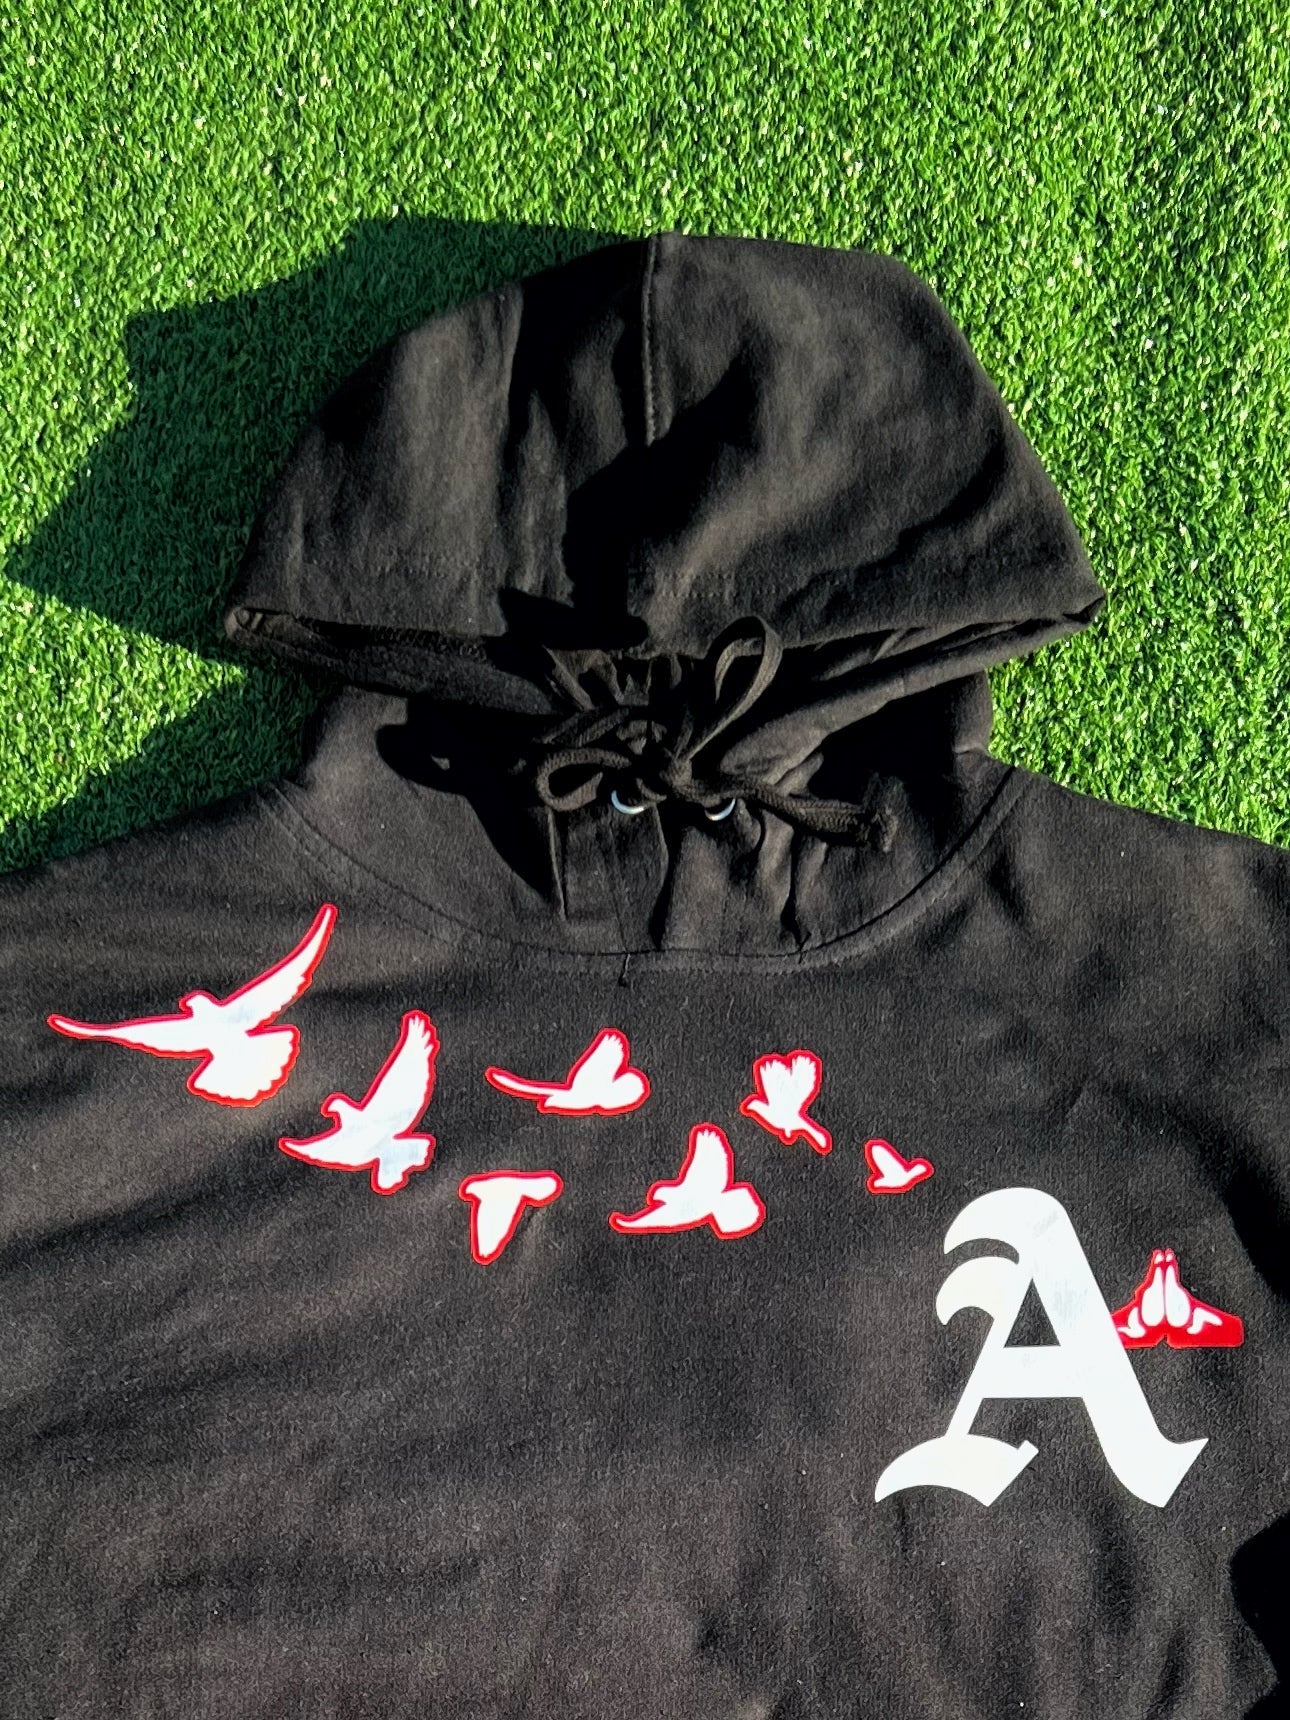 Bred Flocka Doves Hoodie - All Glory To God Apparel @AG2G | Christian Hoodies